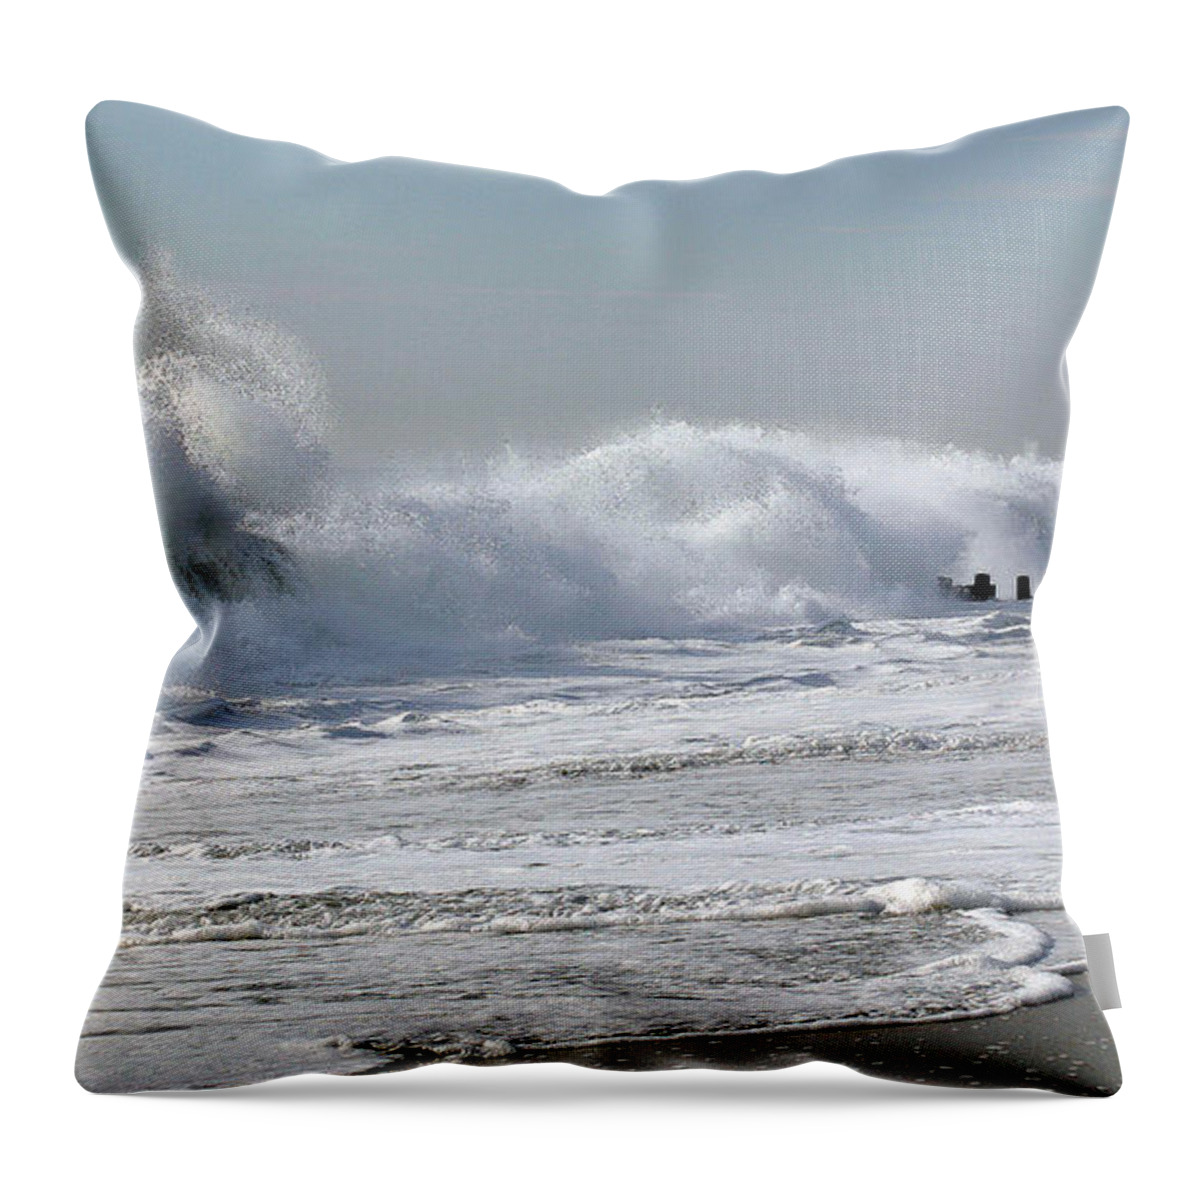 Seascape Throw Pillow featuring the photograph Rough Morning by Mary Haber